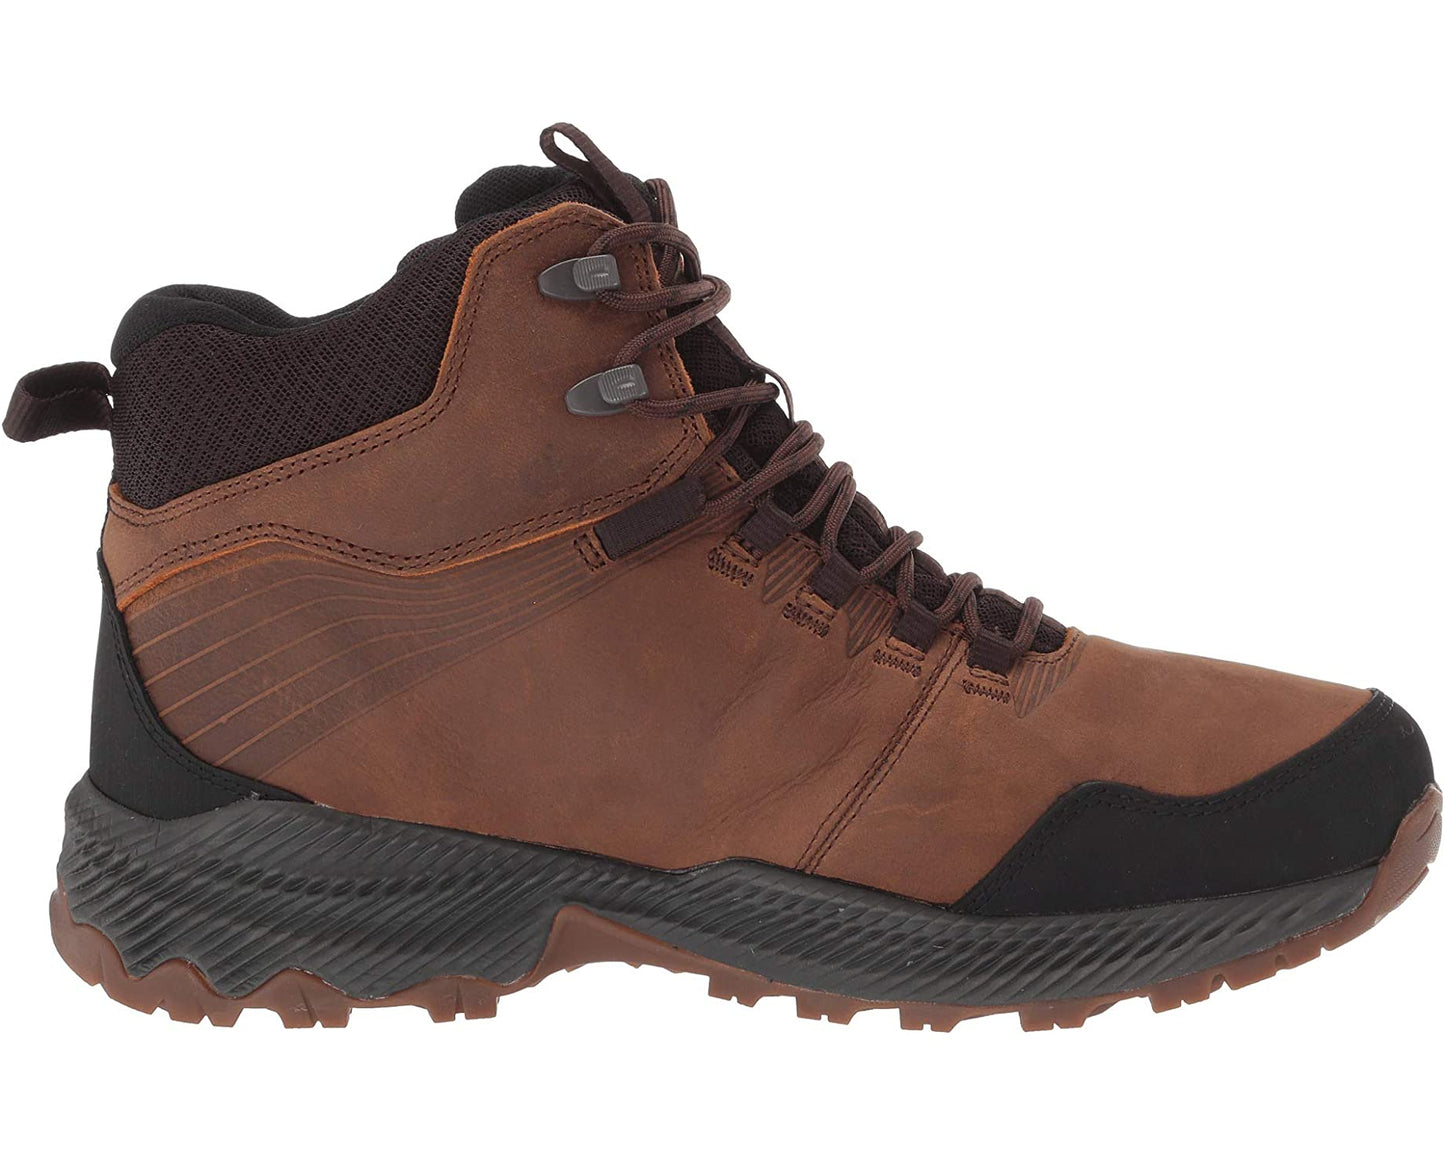 Forestbound Mid Waterproof::Tan